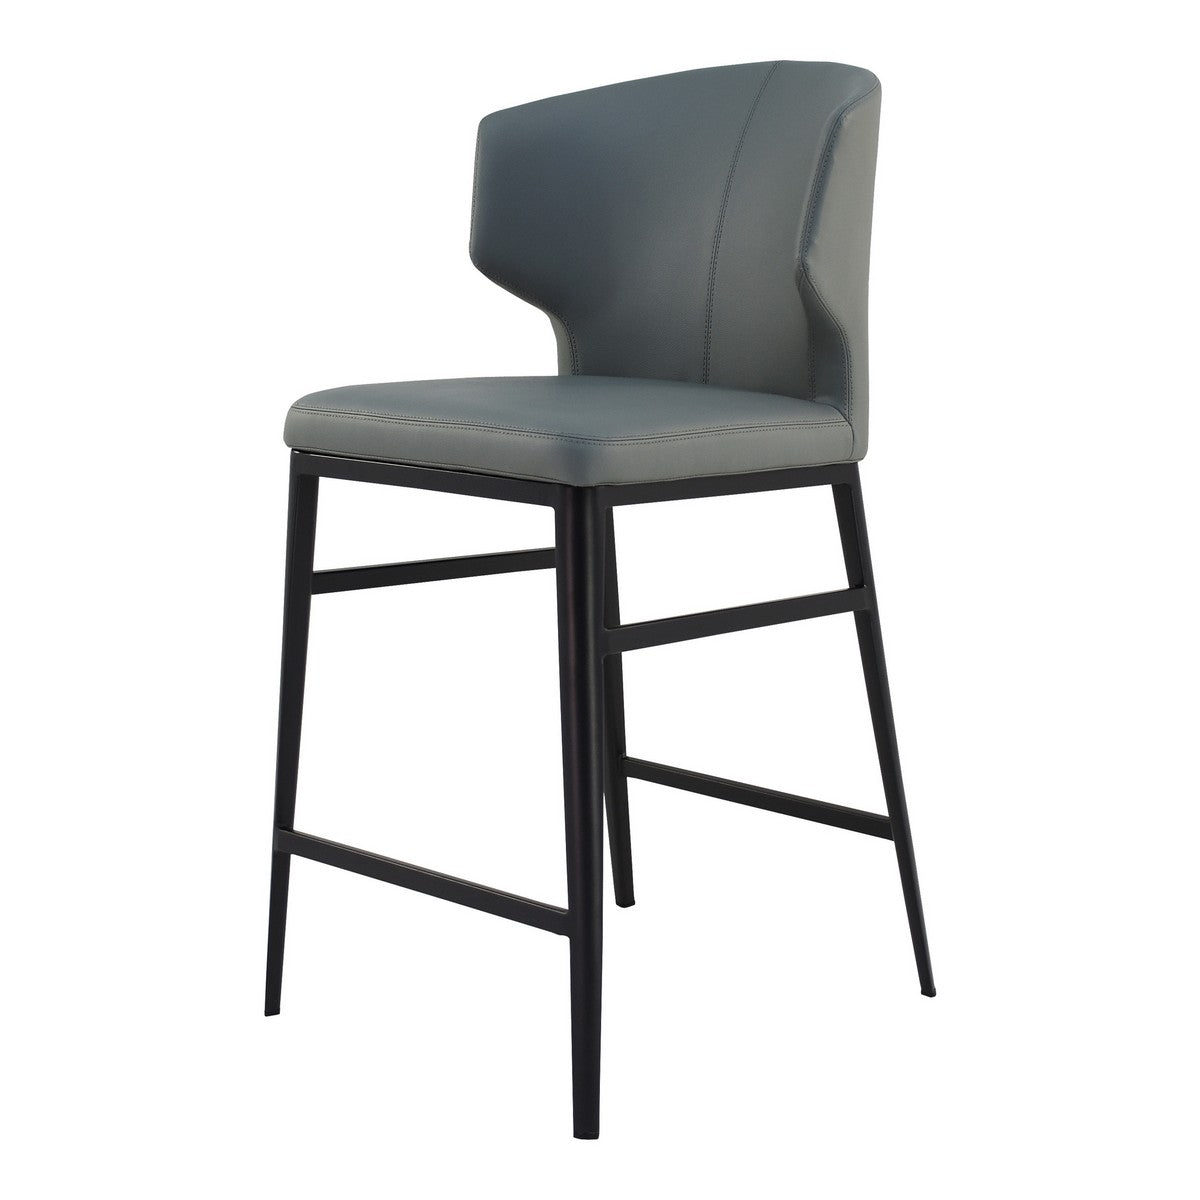 Moe's Home Collection Delaney Counter Stool Grey - EJ-1022-15